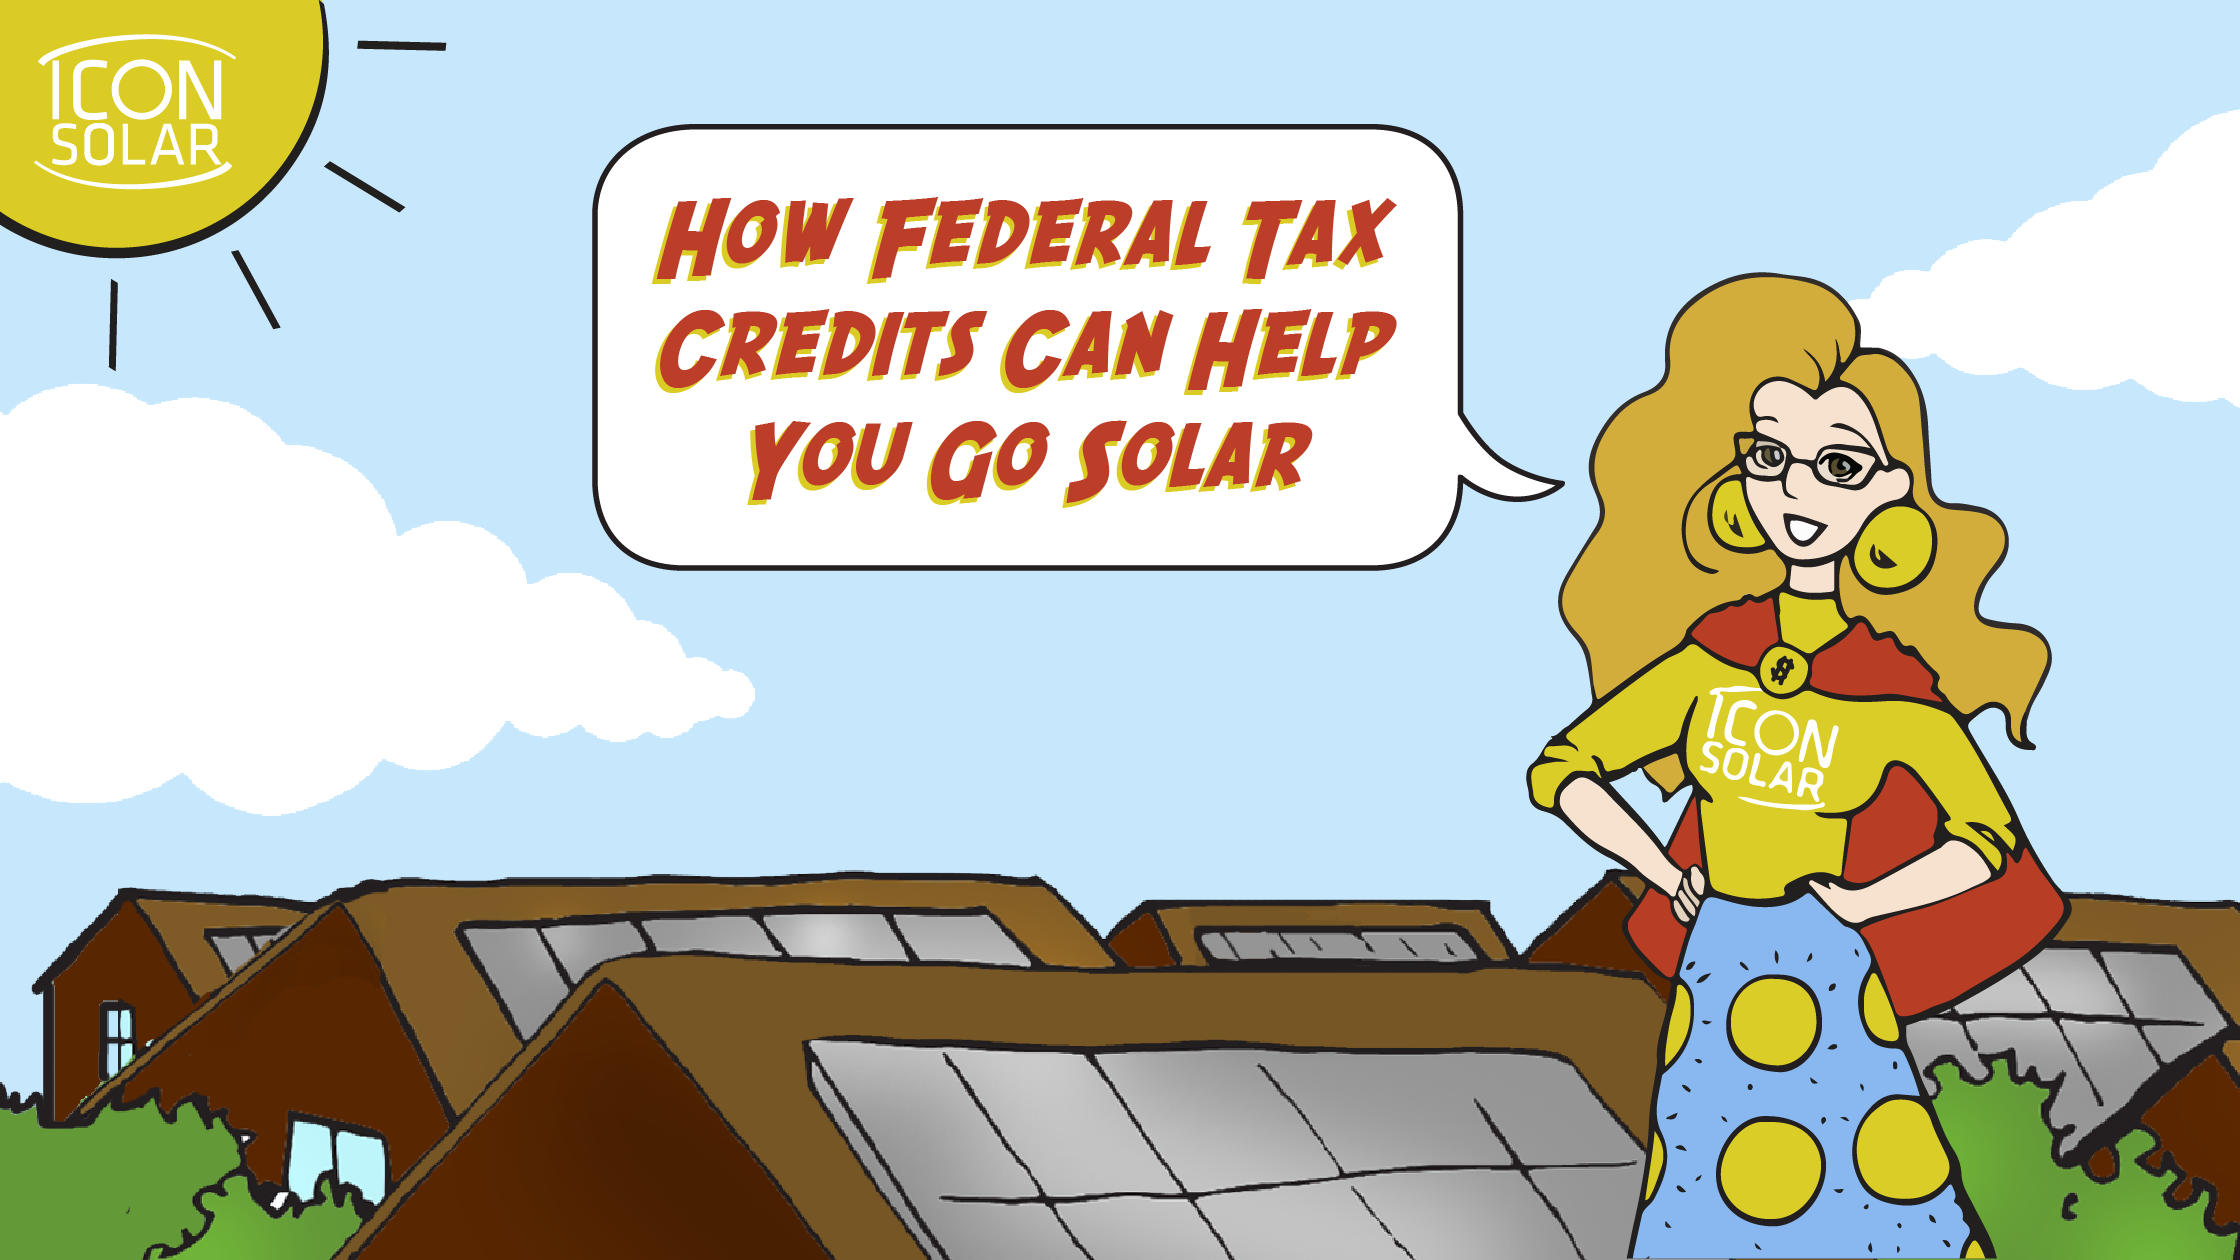 How federal tax credits can help you go solar